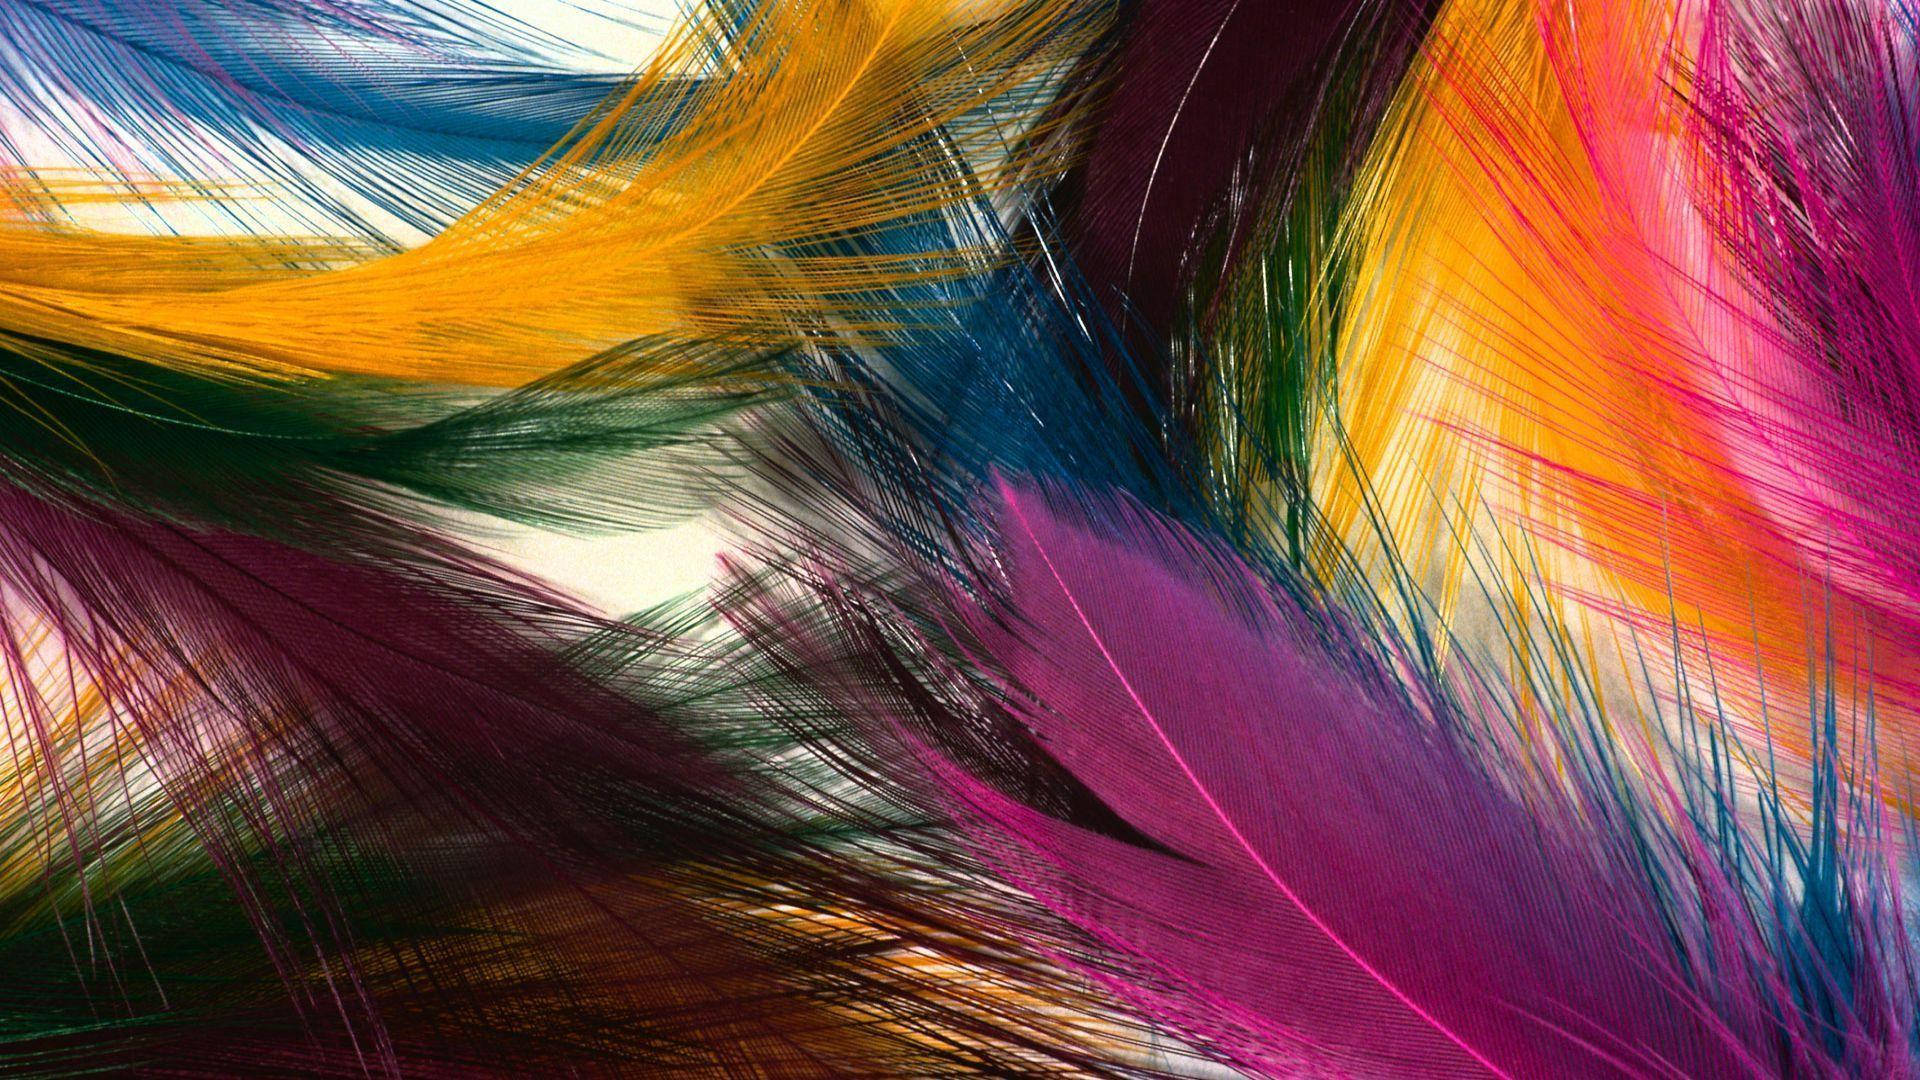 "Be as unique as these colorful feathers!" Wallpaper